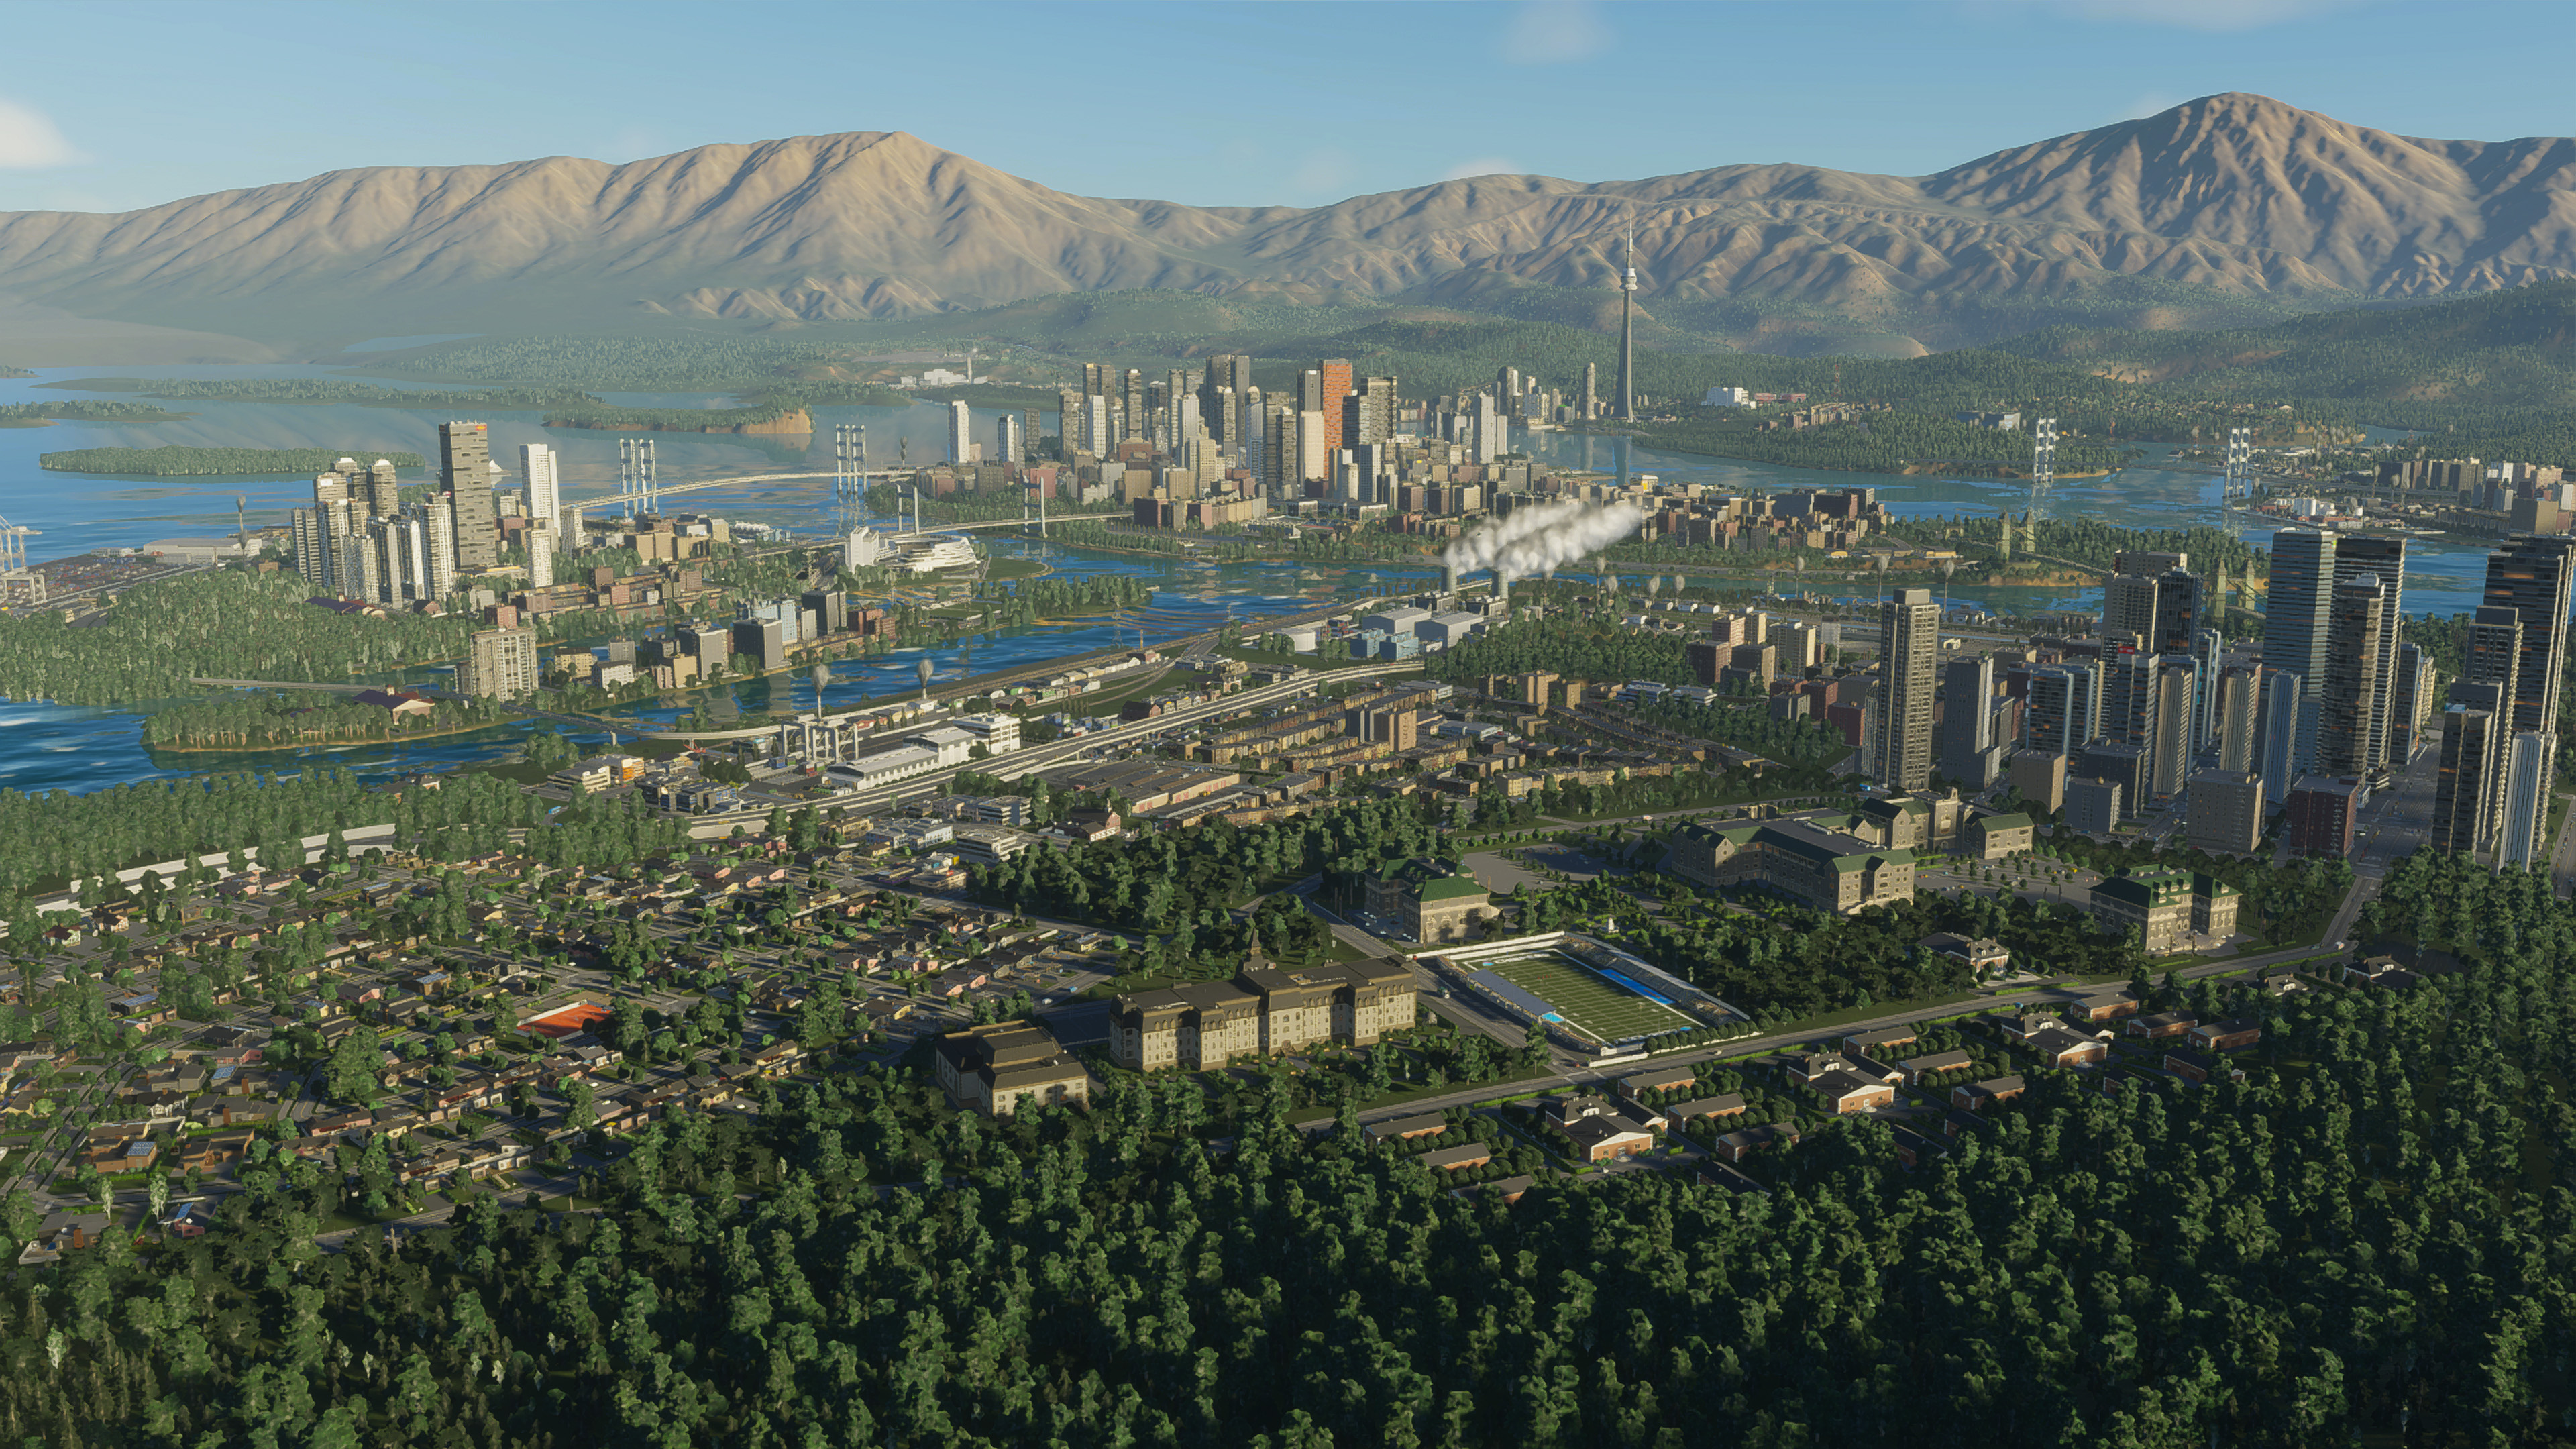 Cities: Skylines - Remastered announced for PS5, Xbox Series - Gematsu